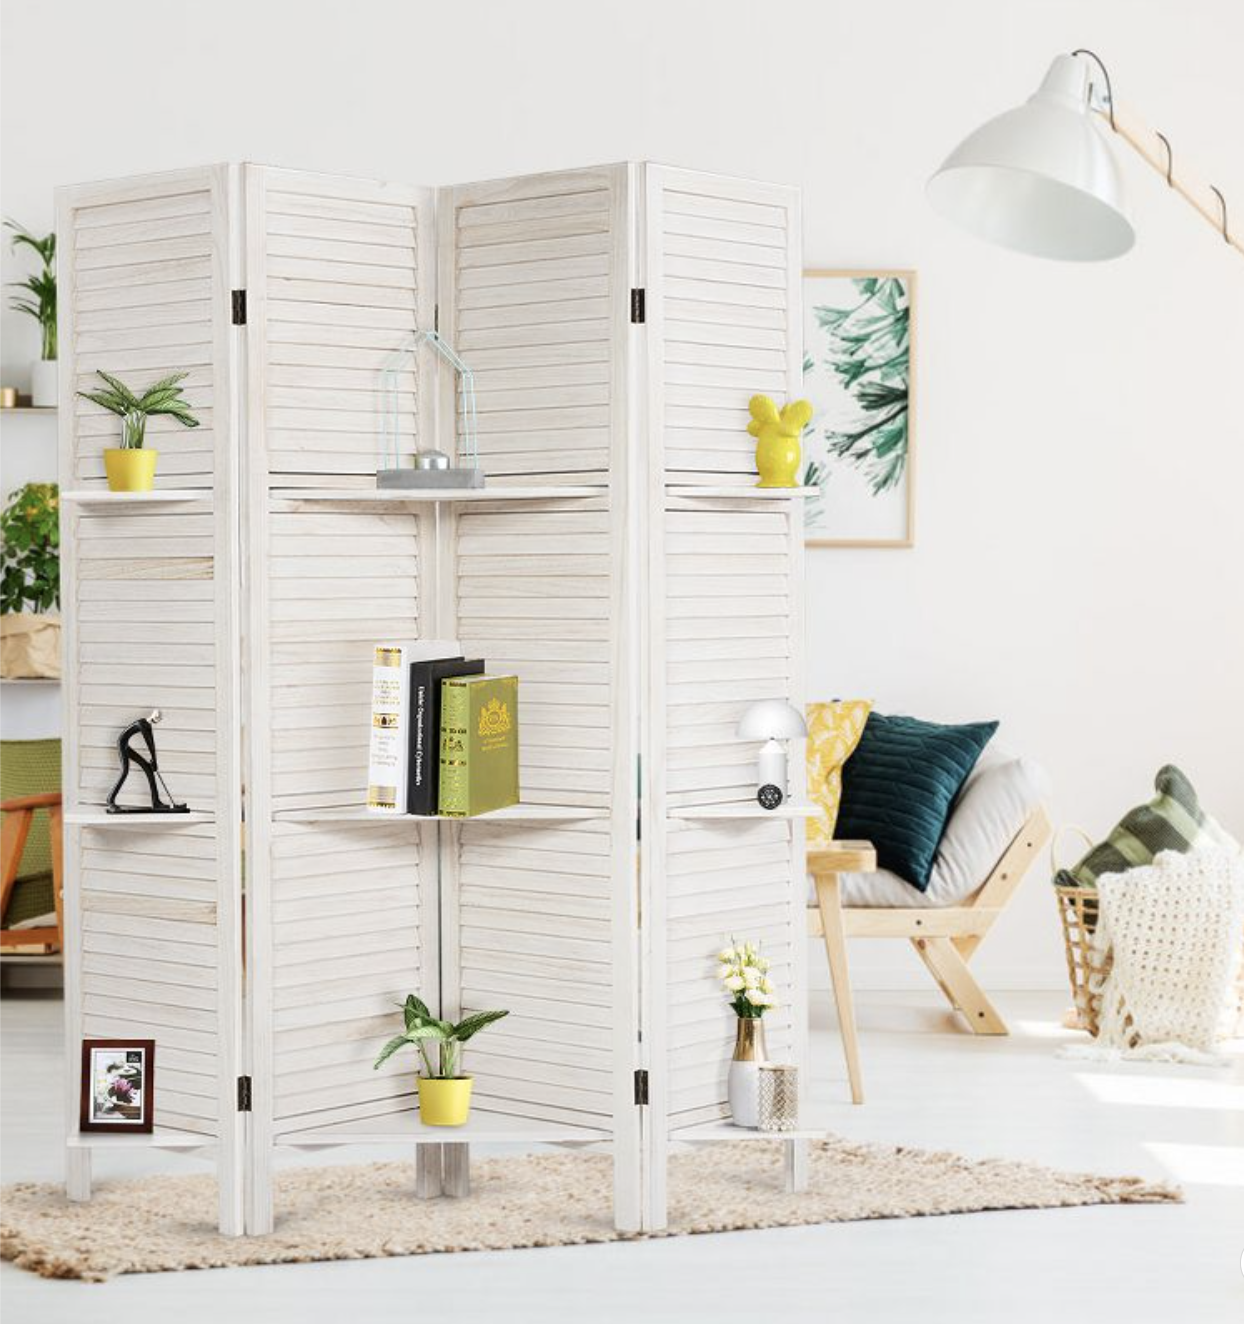 the white room divider with frames, plants and vases on the shelves